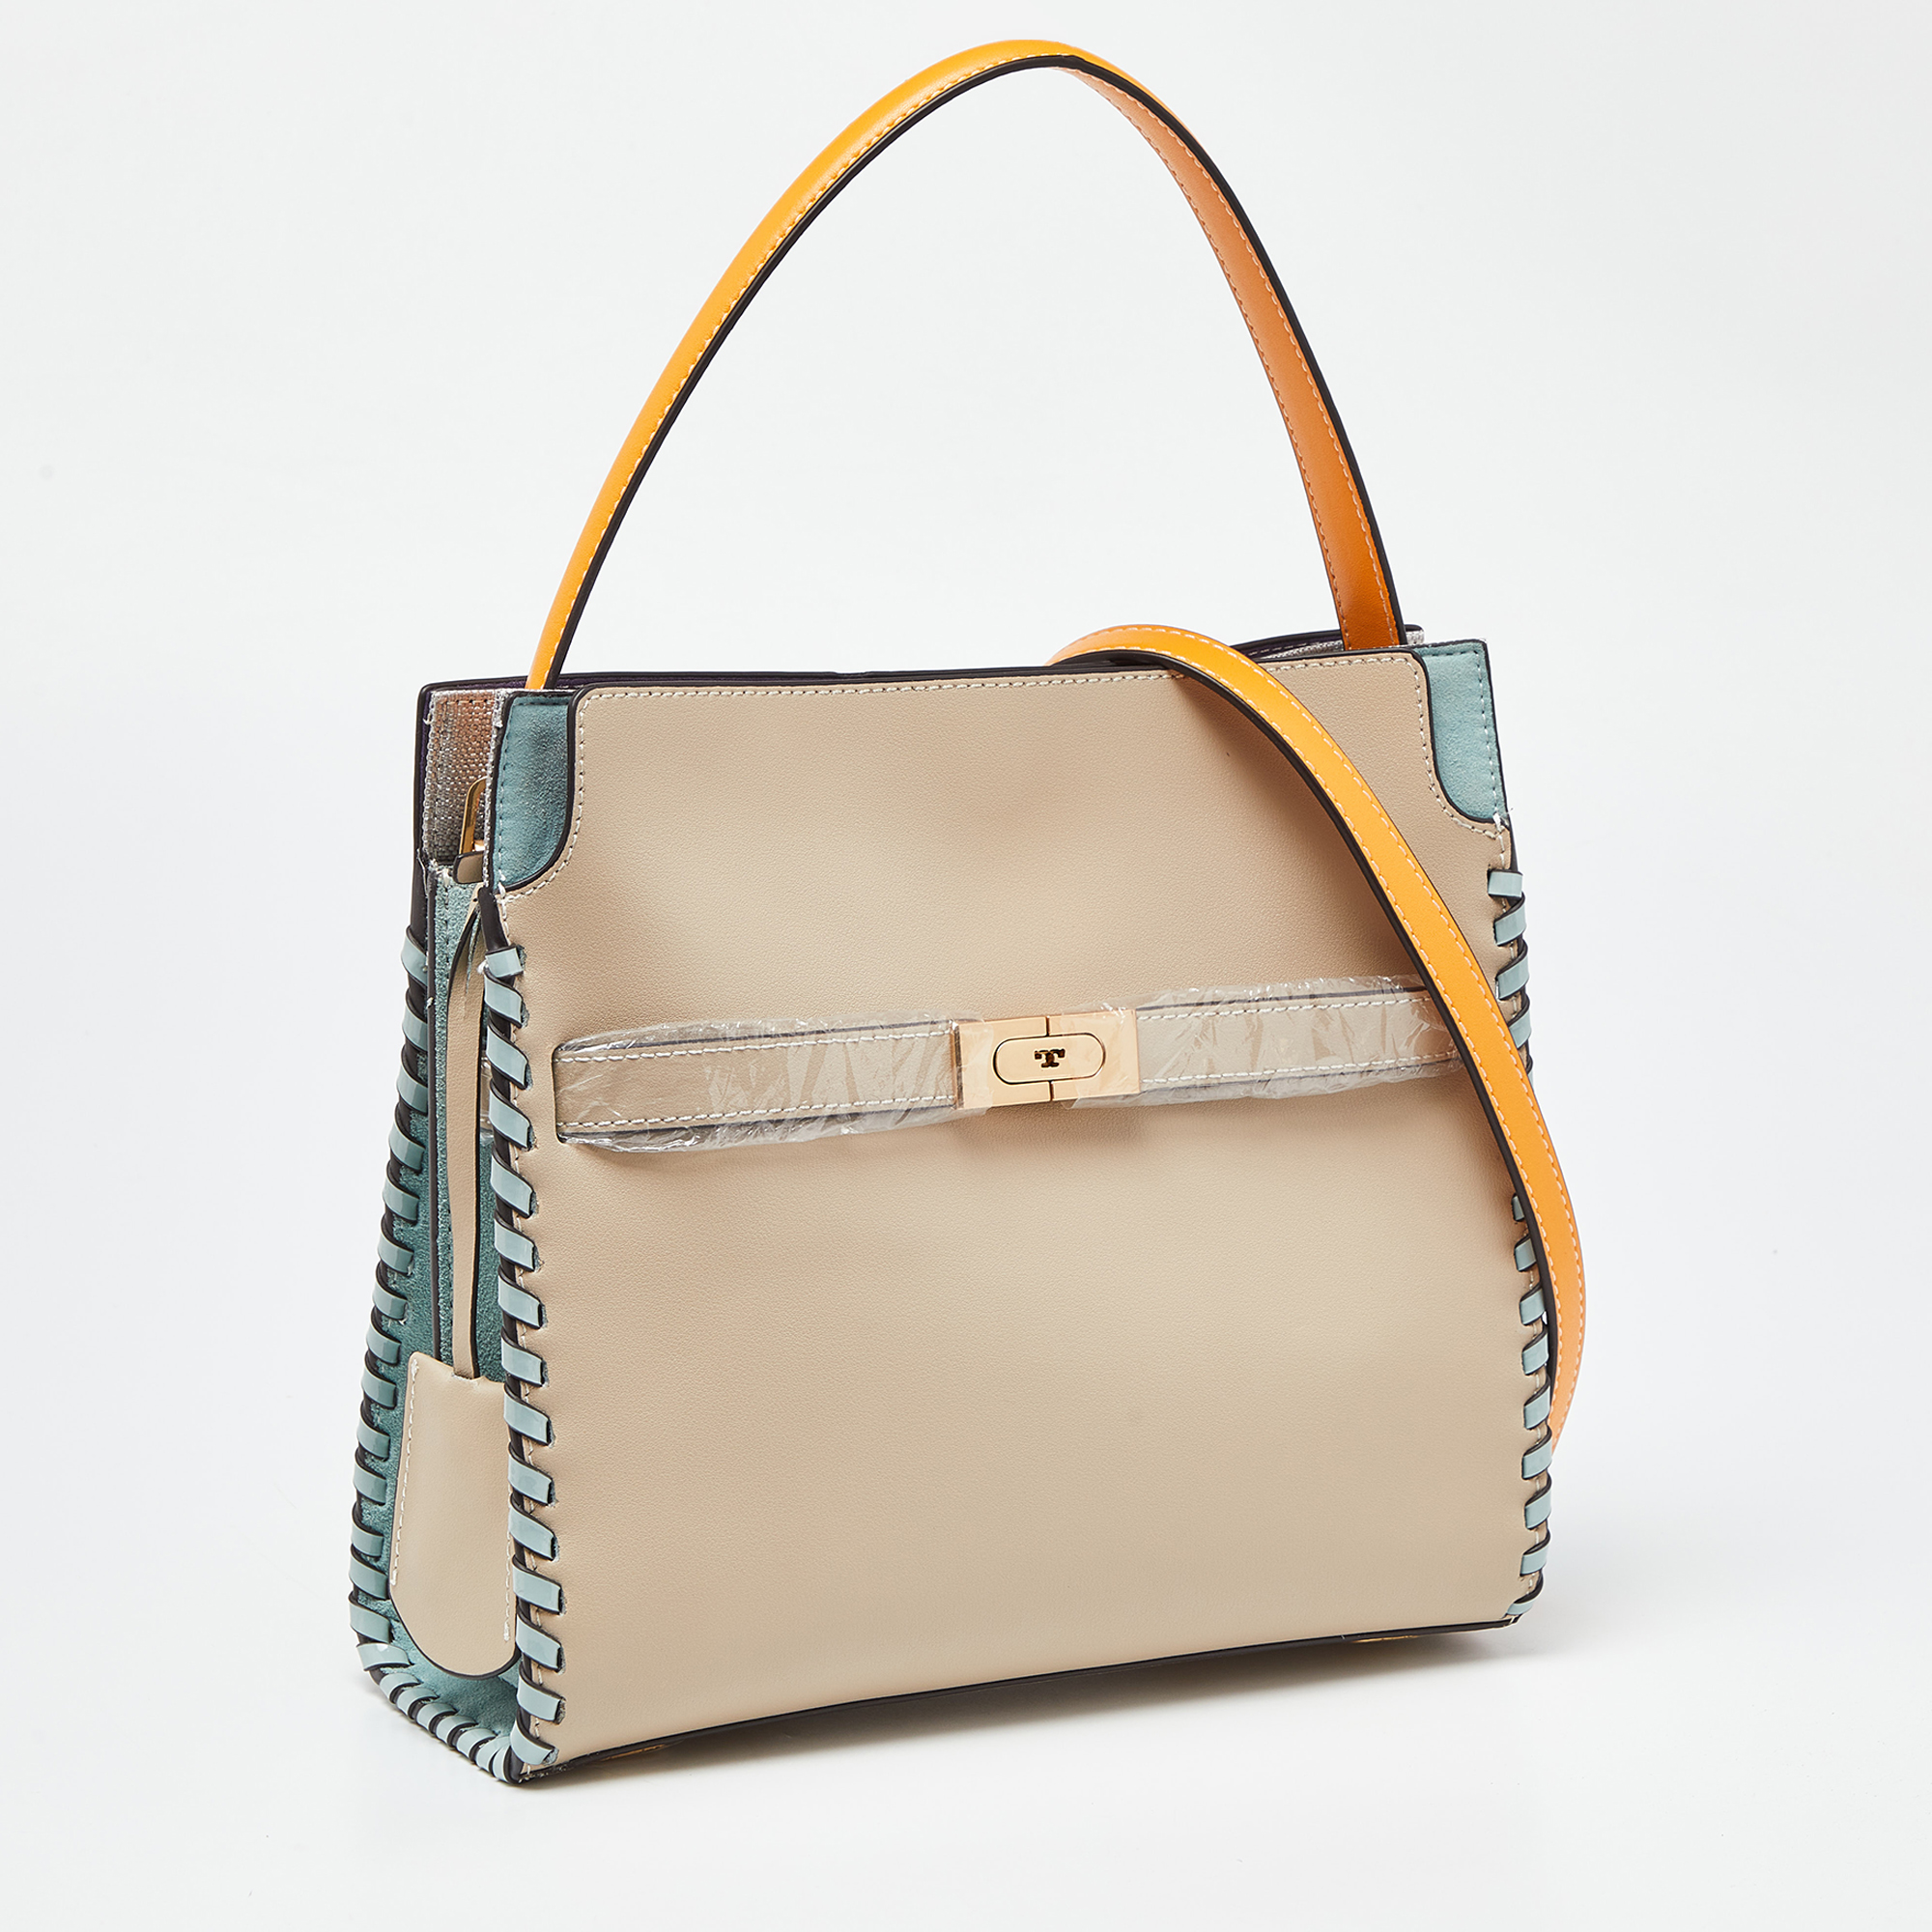 Tory Burch Multicolor Leather And Suede Small Lee Radziwill Whipstitch Lee Radziwill Top Hande Bag